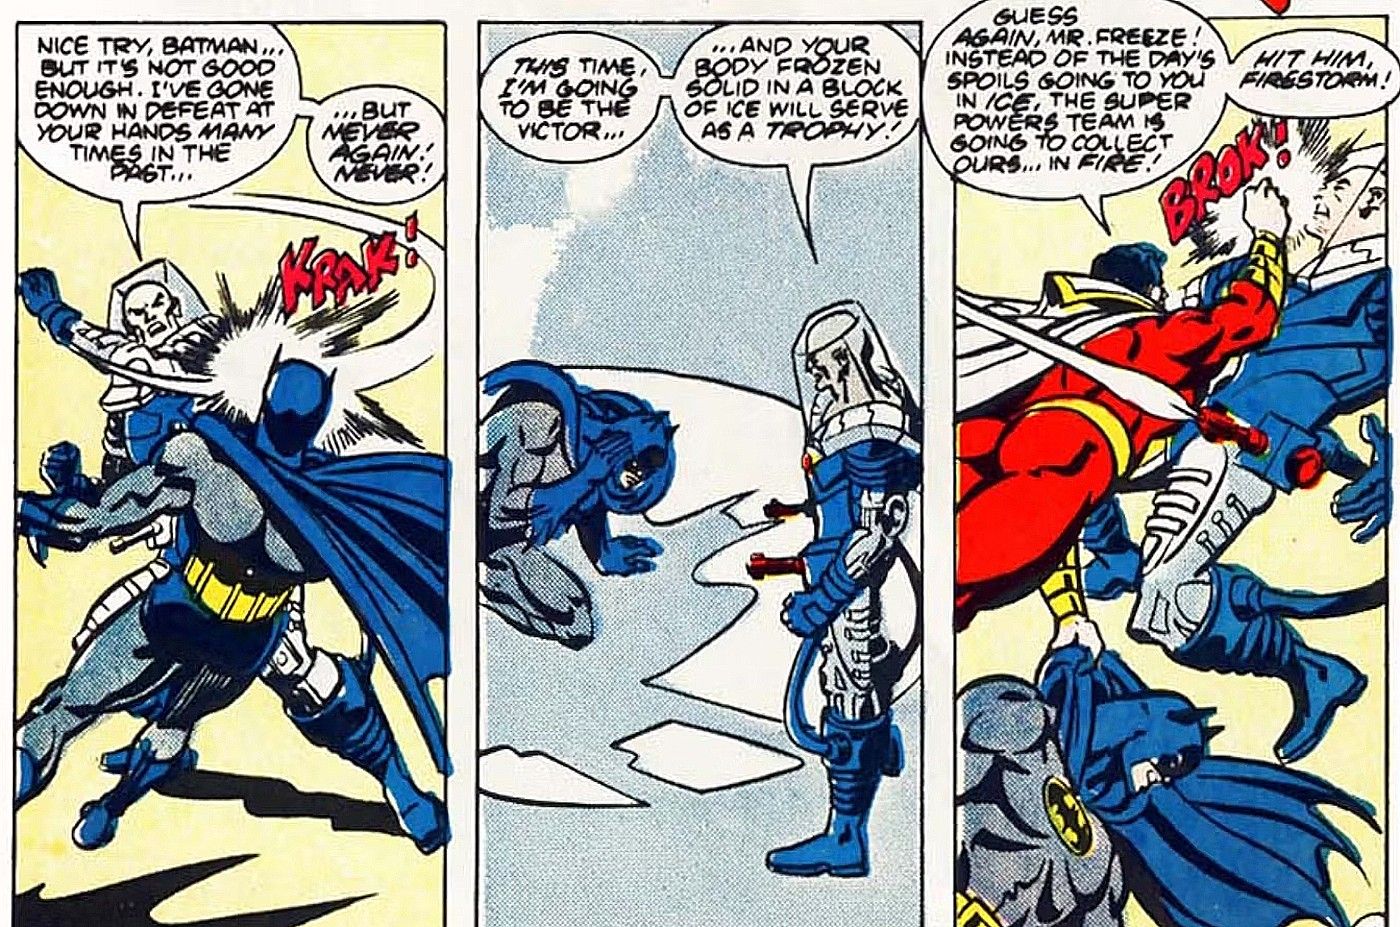 Super Power #2, Mr. Freeze defeats Batman after being upgraded with Omega energy